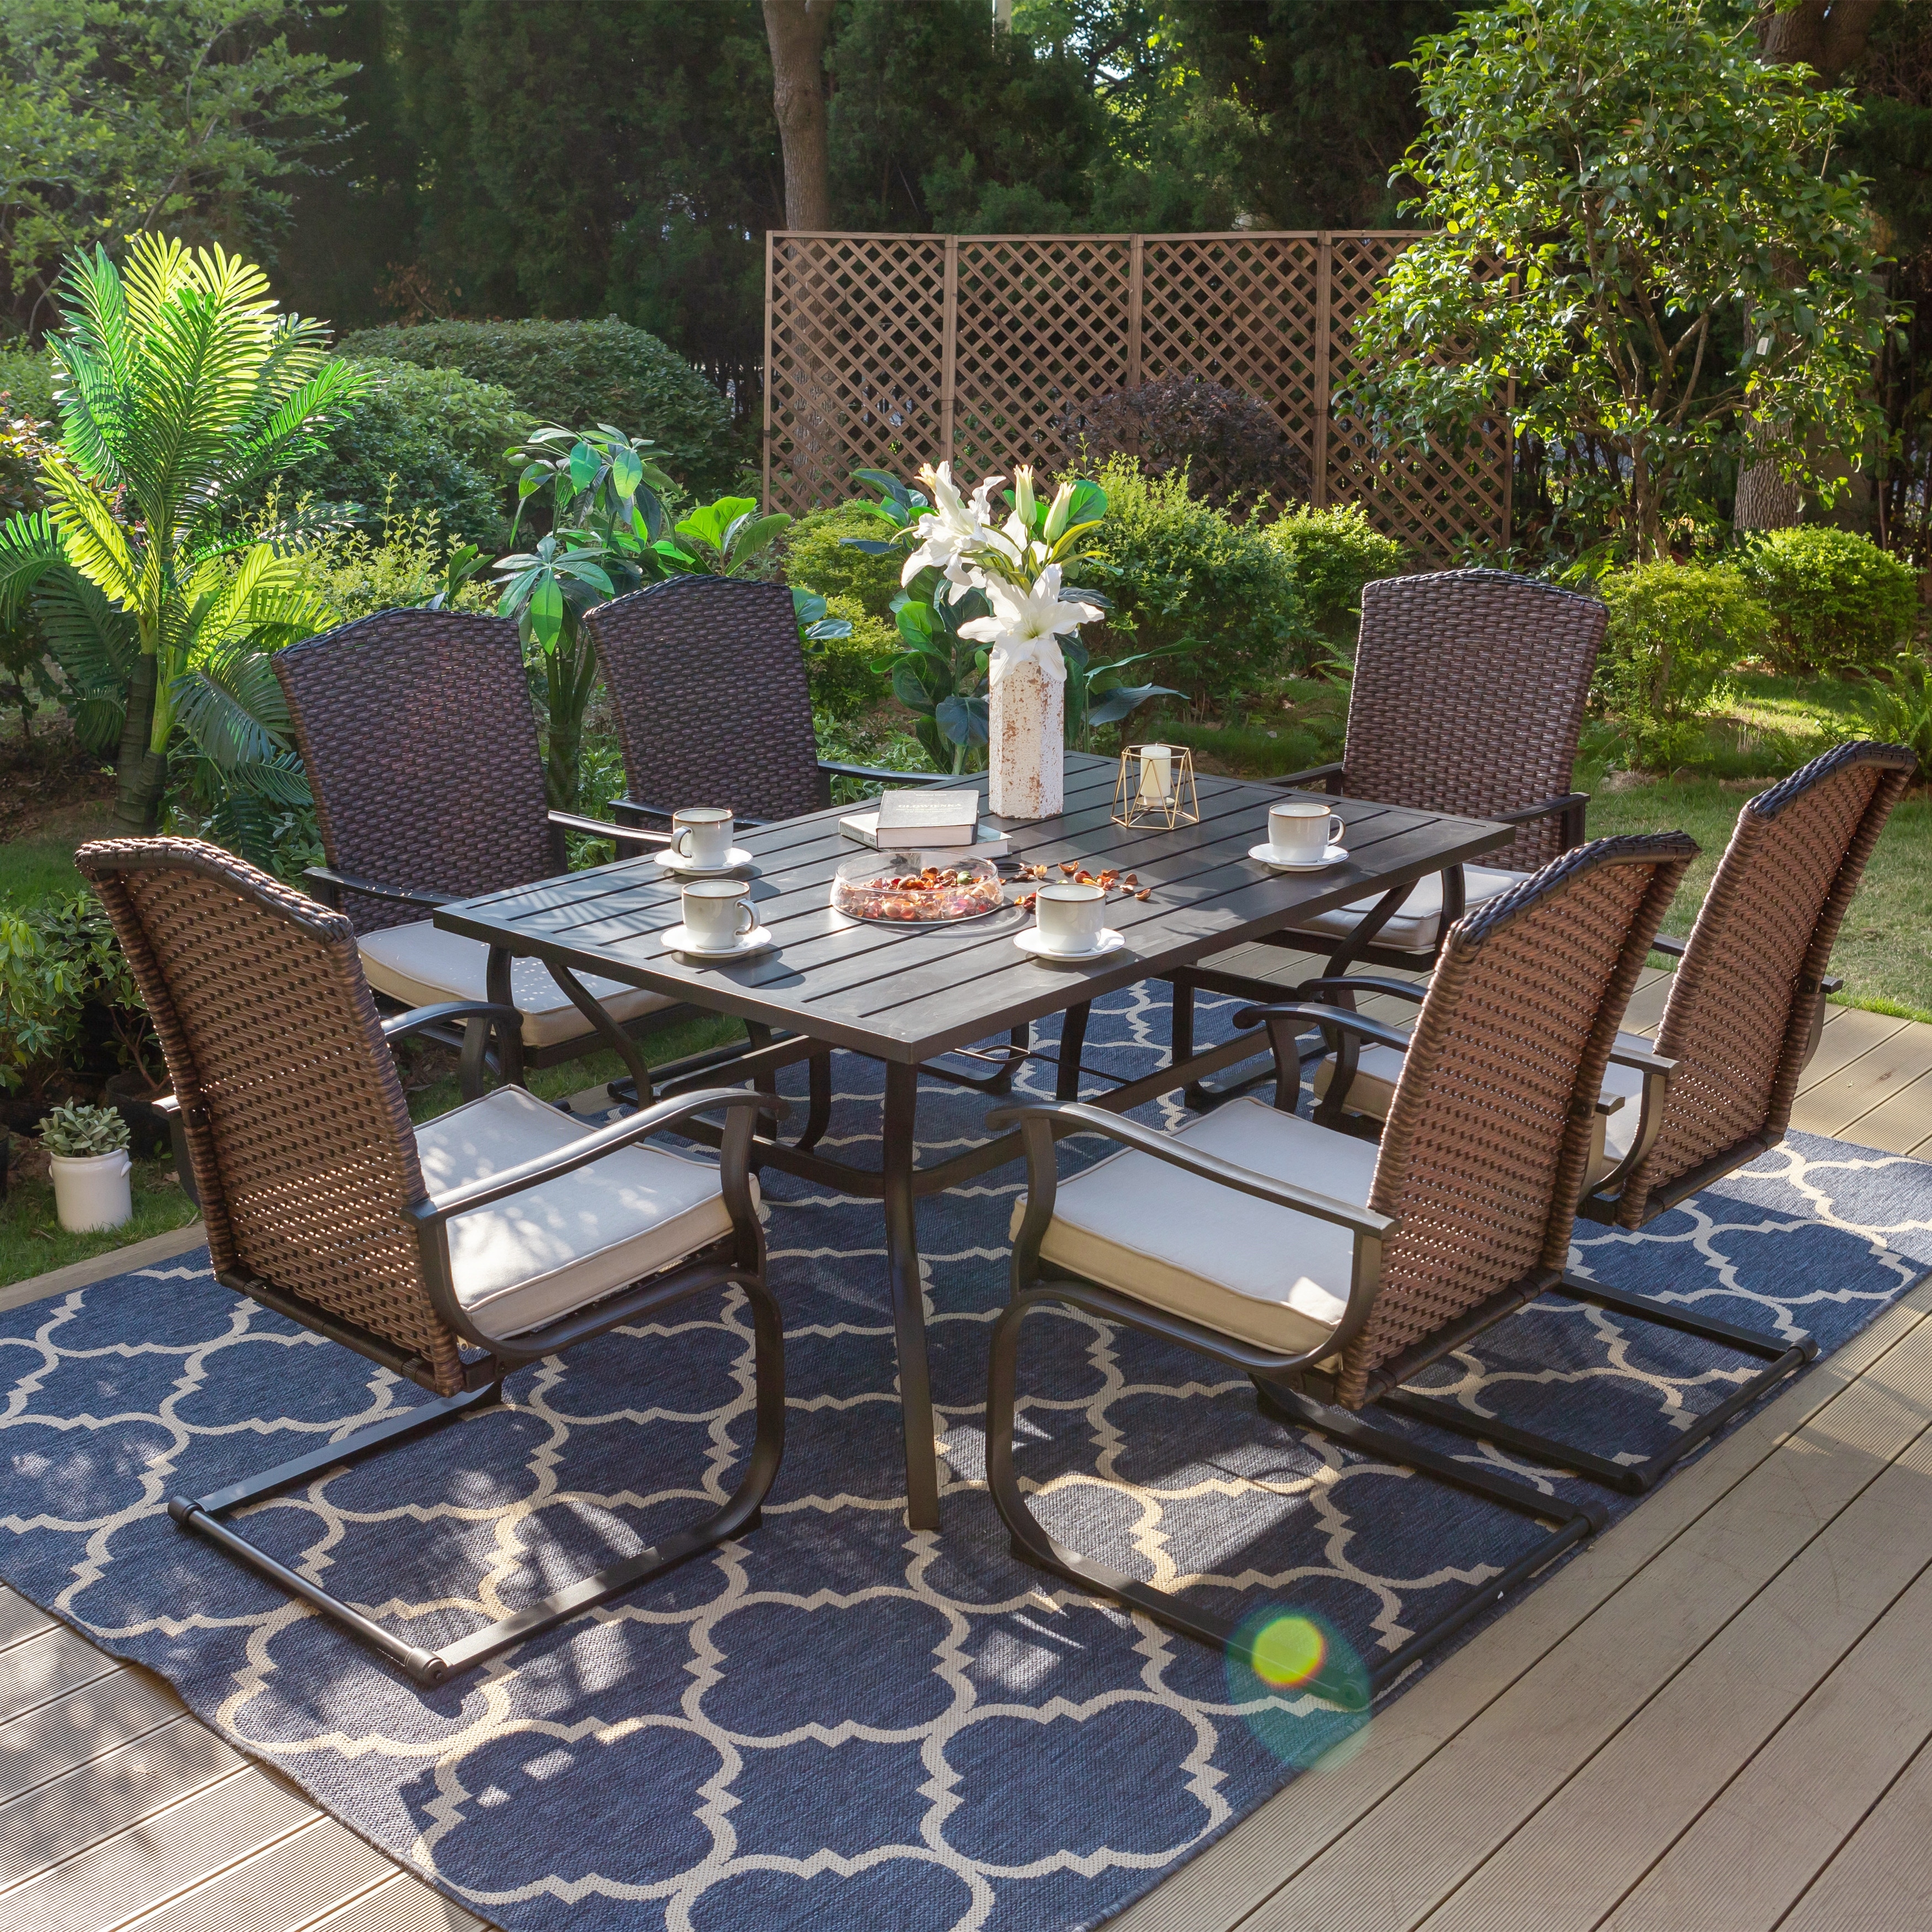 7-piece Patio Dining Set   6 Rattan Wicker Armrest Swivel Chairs With Cushion And 1 Metal Table With 1.57  Umbrella Hole